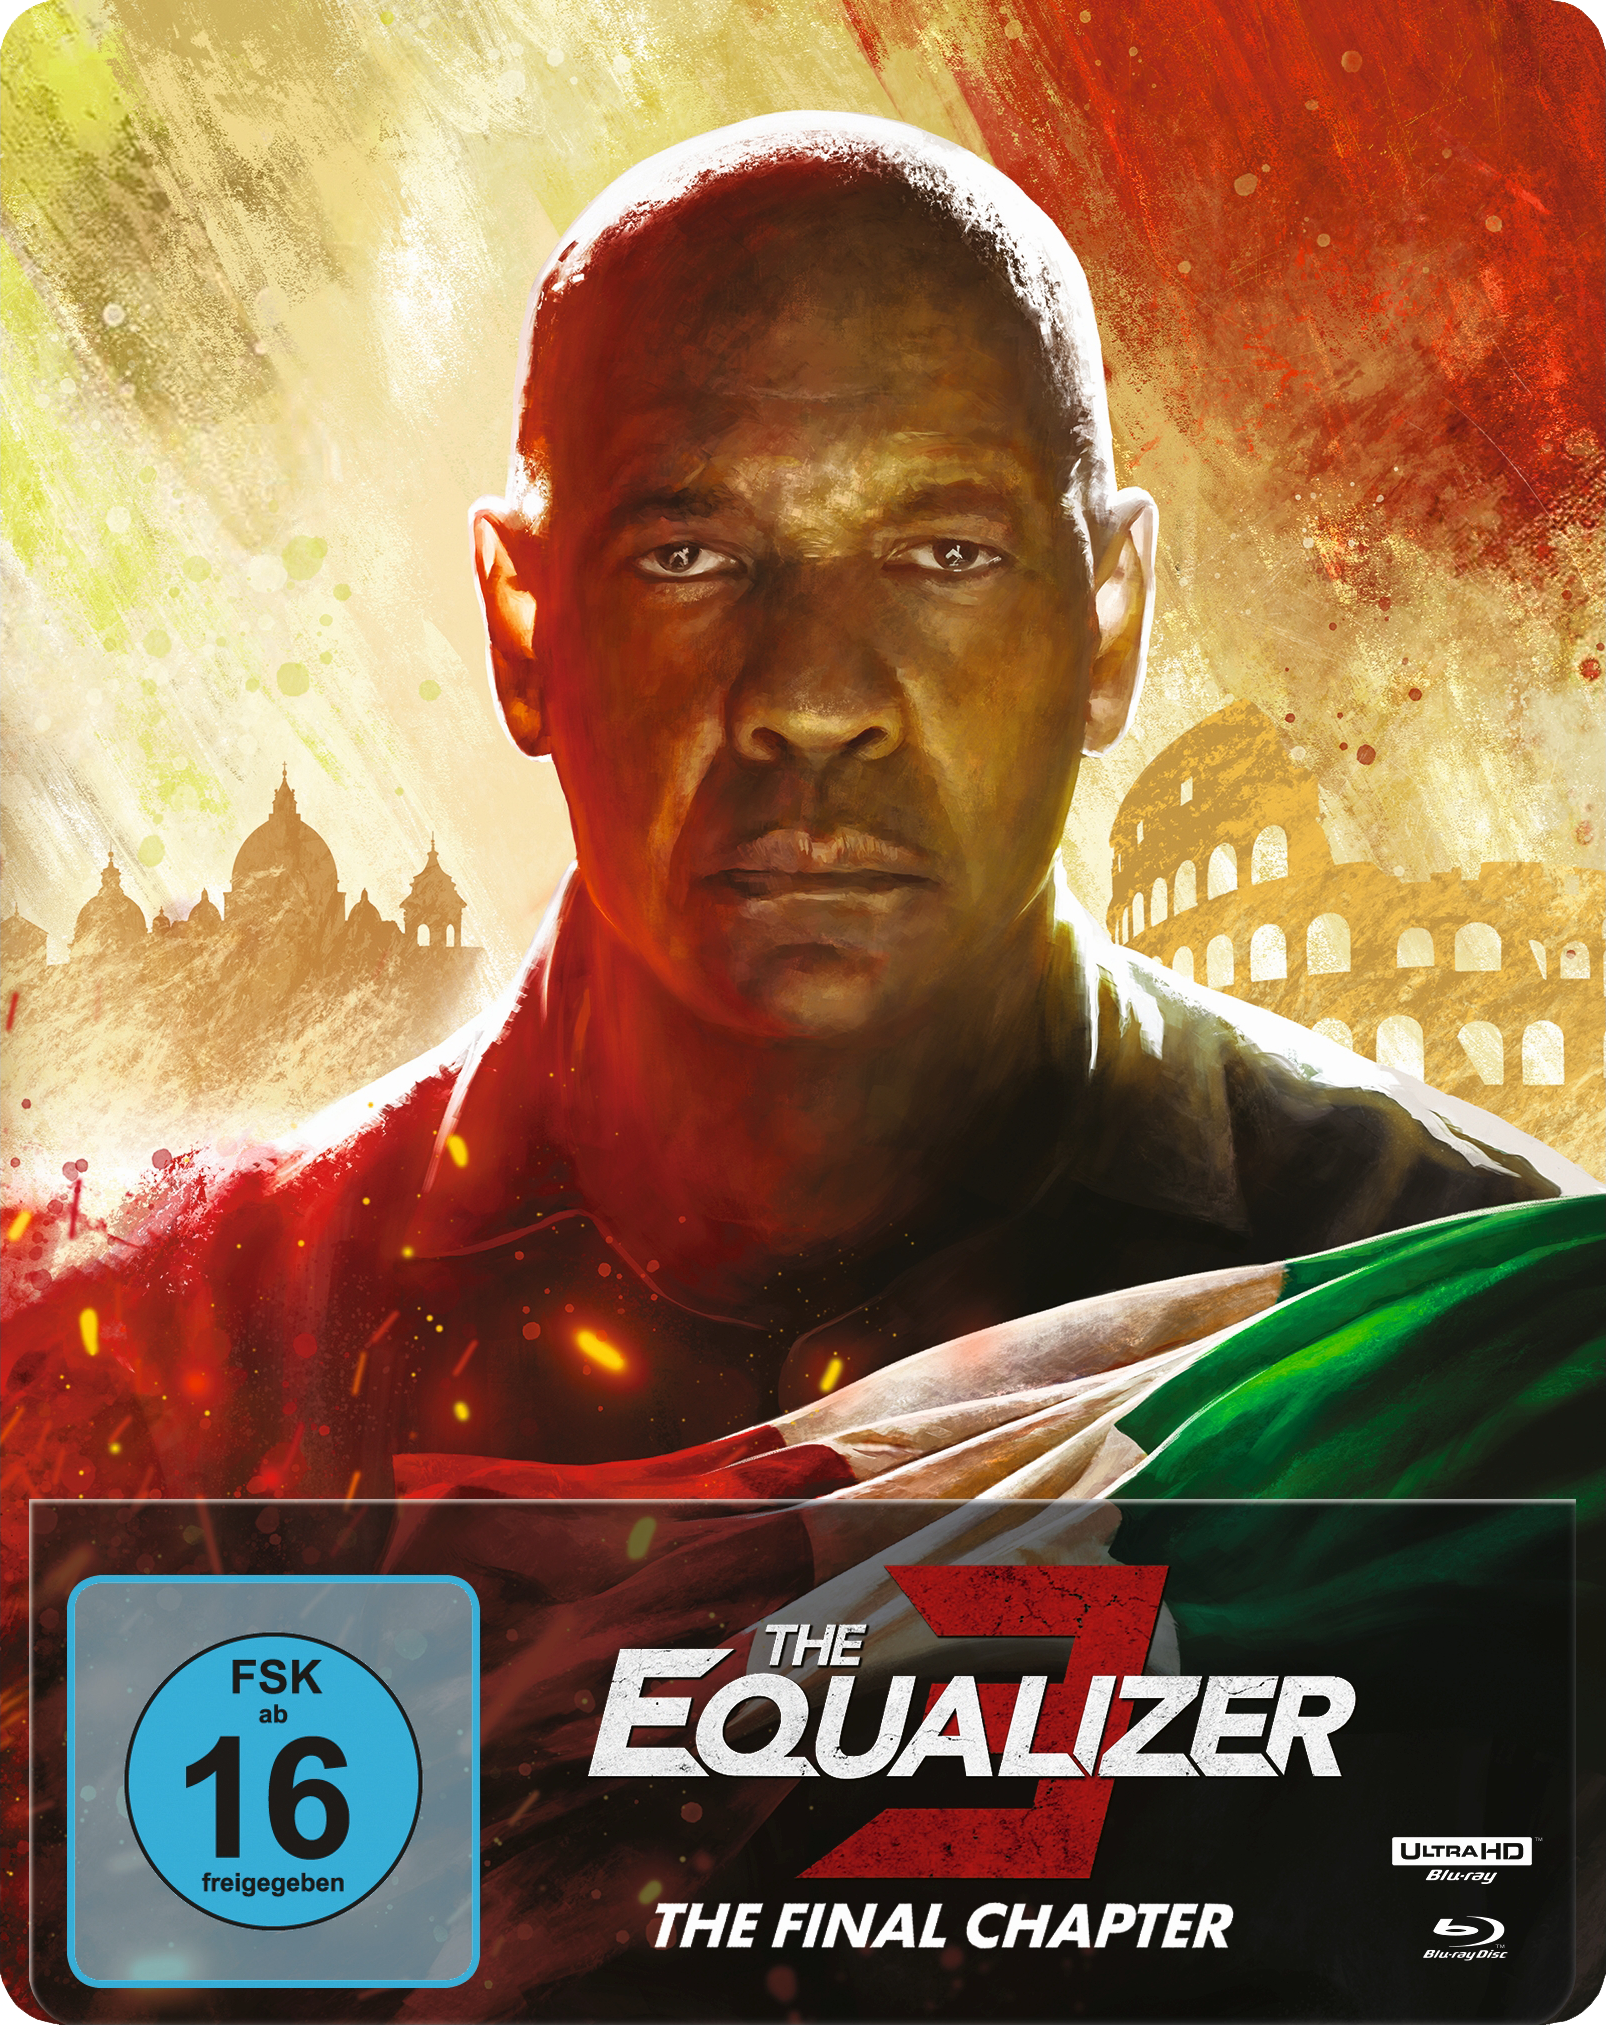 The Equalizer 3 - The Final Chapter (Steelbook A, 4K-UHD+Blu-ray)